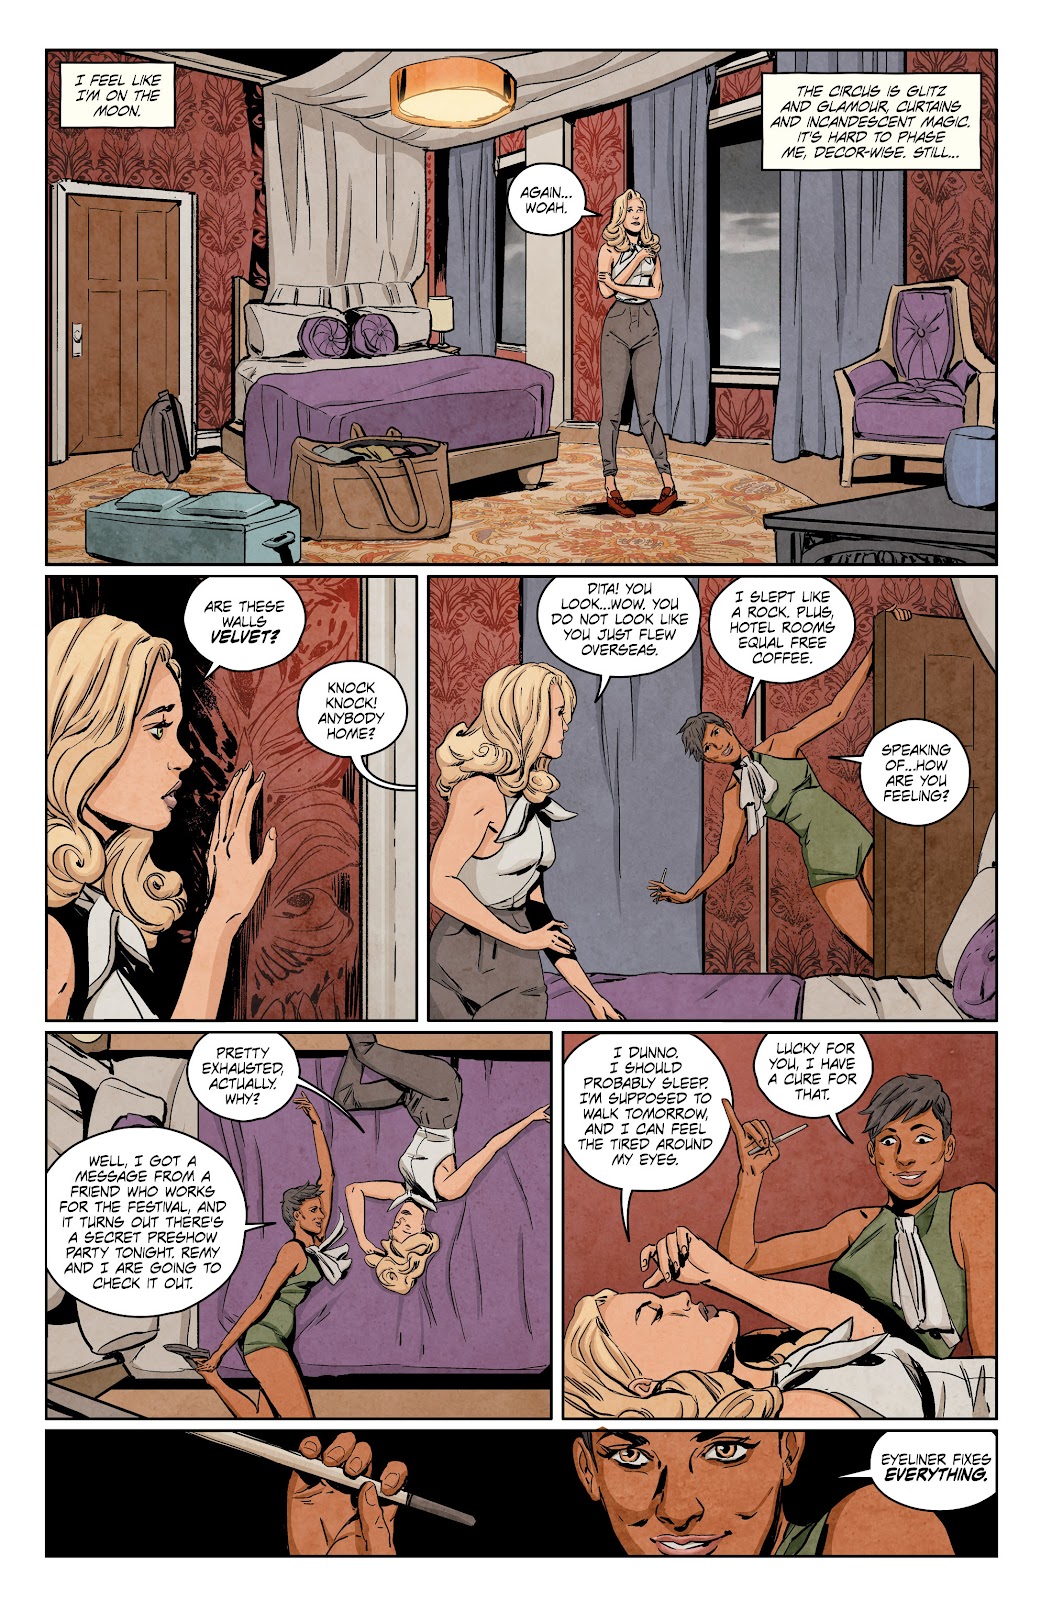 Girl Over Paris (The Cirque American Series) issue 1 - Page 9